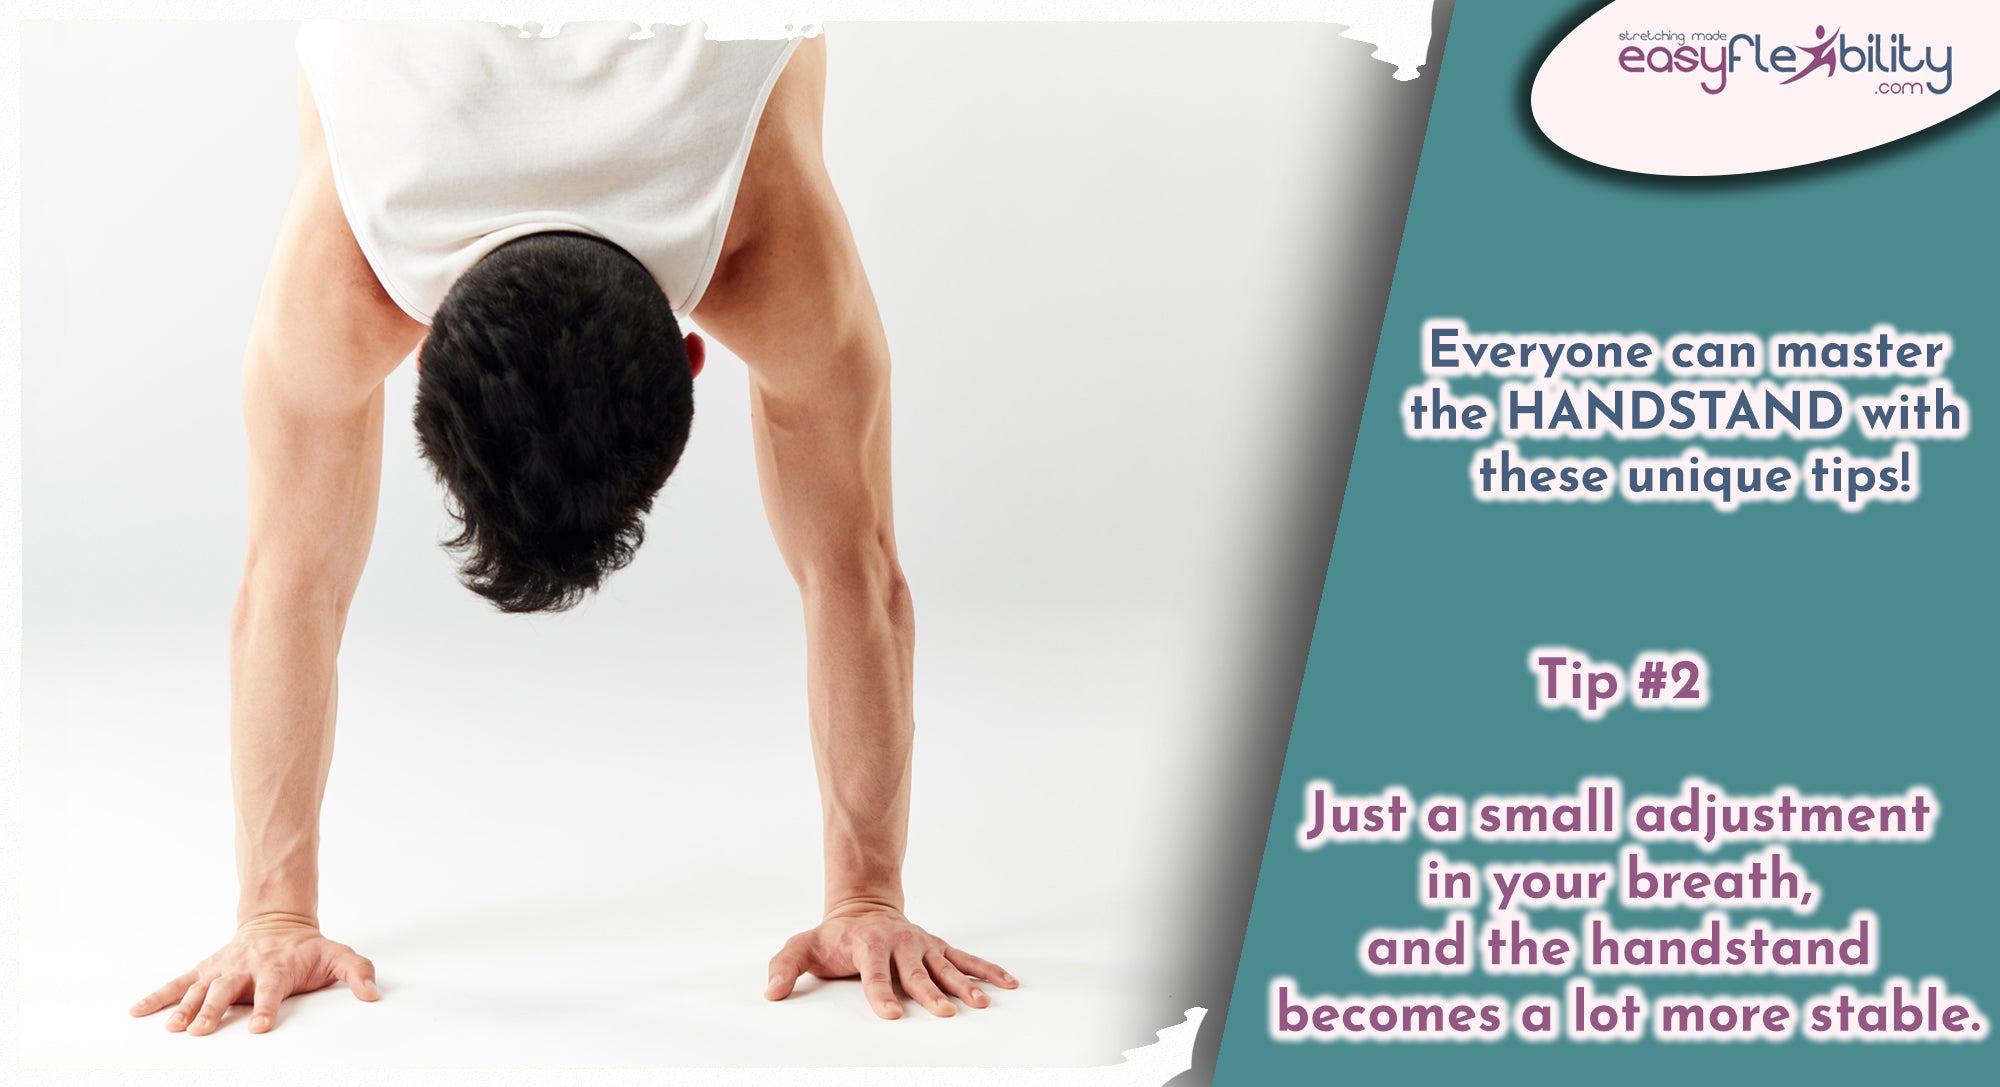 Tip #2 just a small adjustment in your breath, and the handstand becomes a lot more stable.